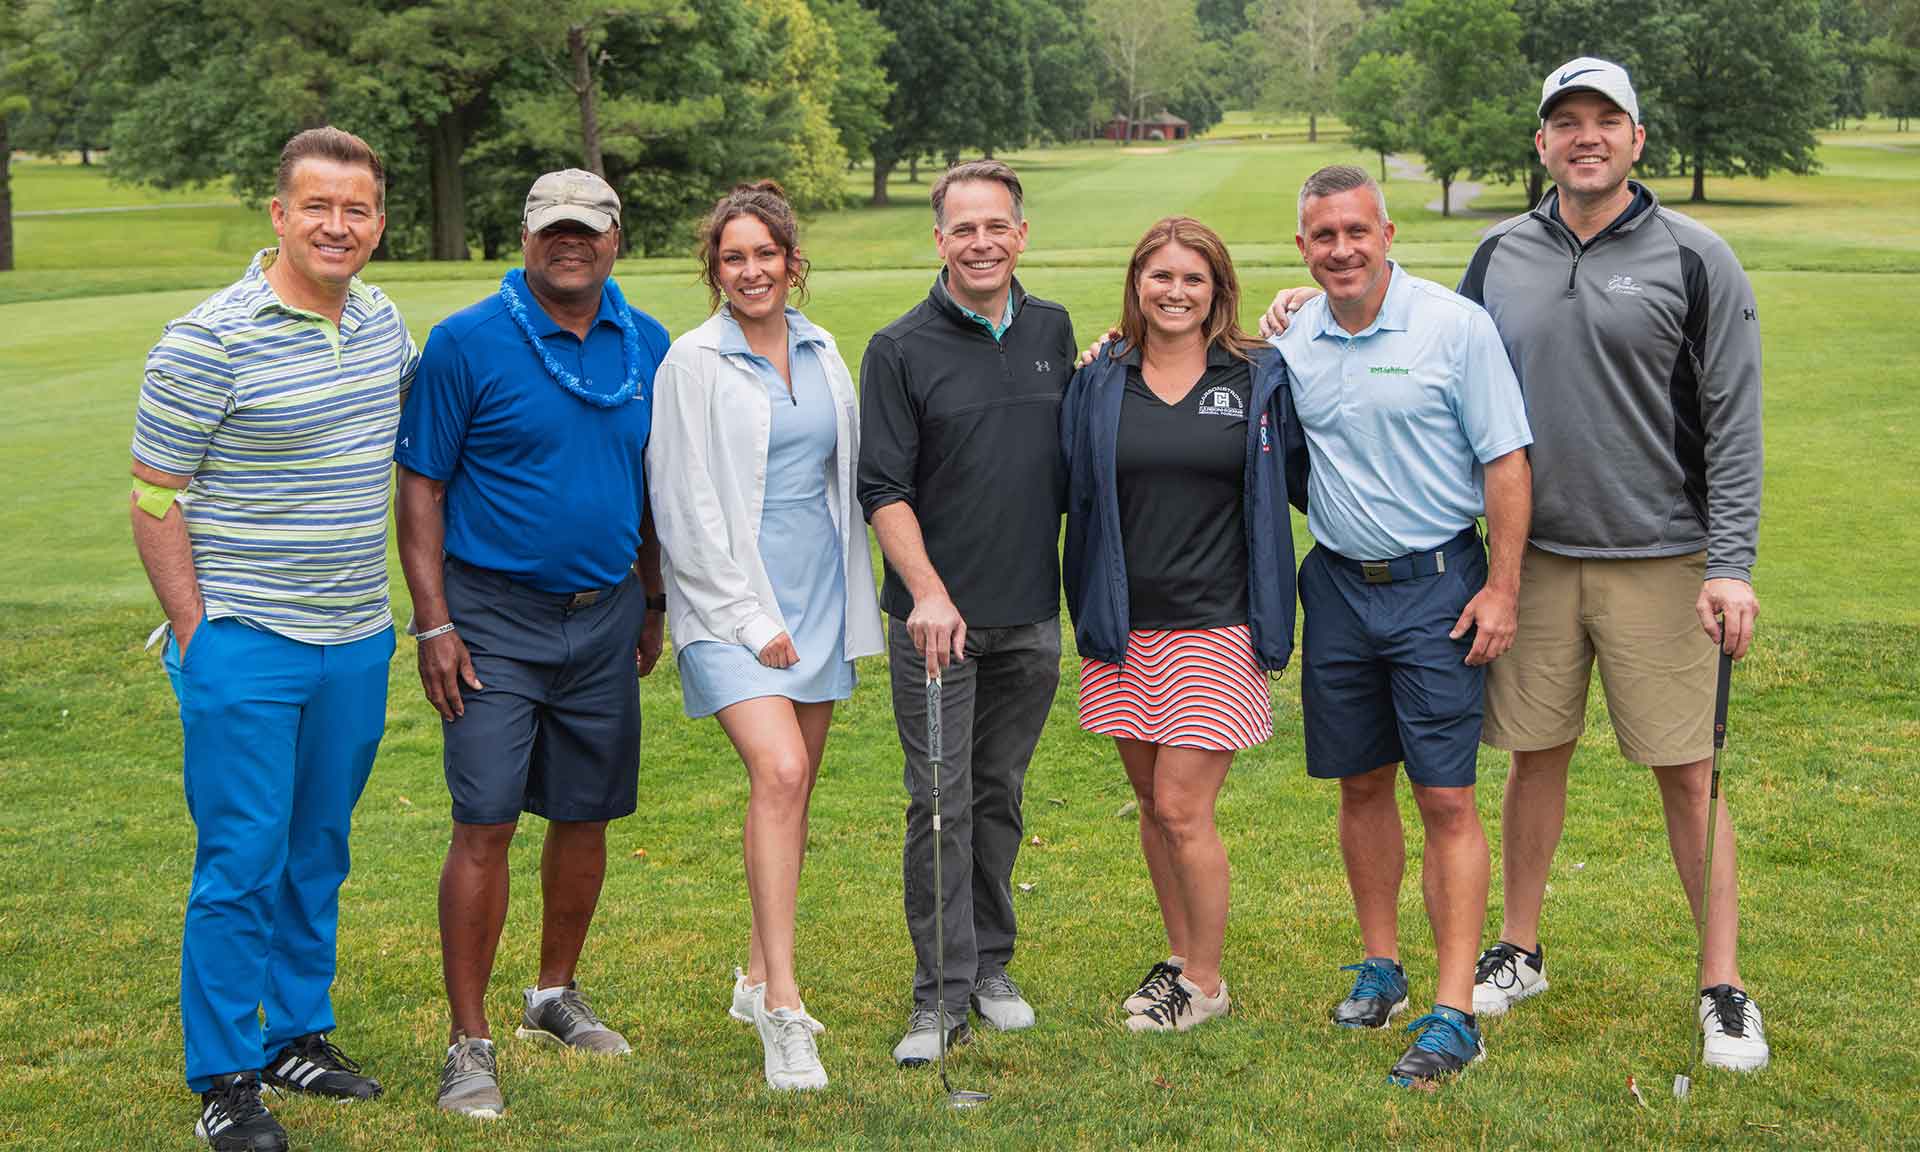 Fox 8 Golf Outing presented by CrossCountry Mortgage